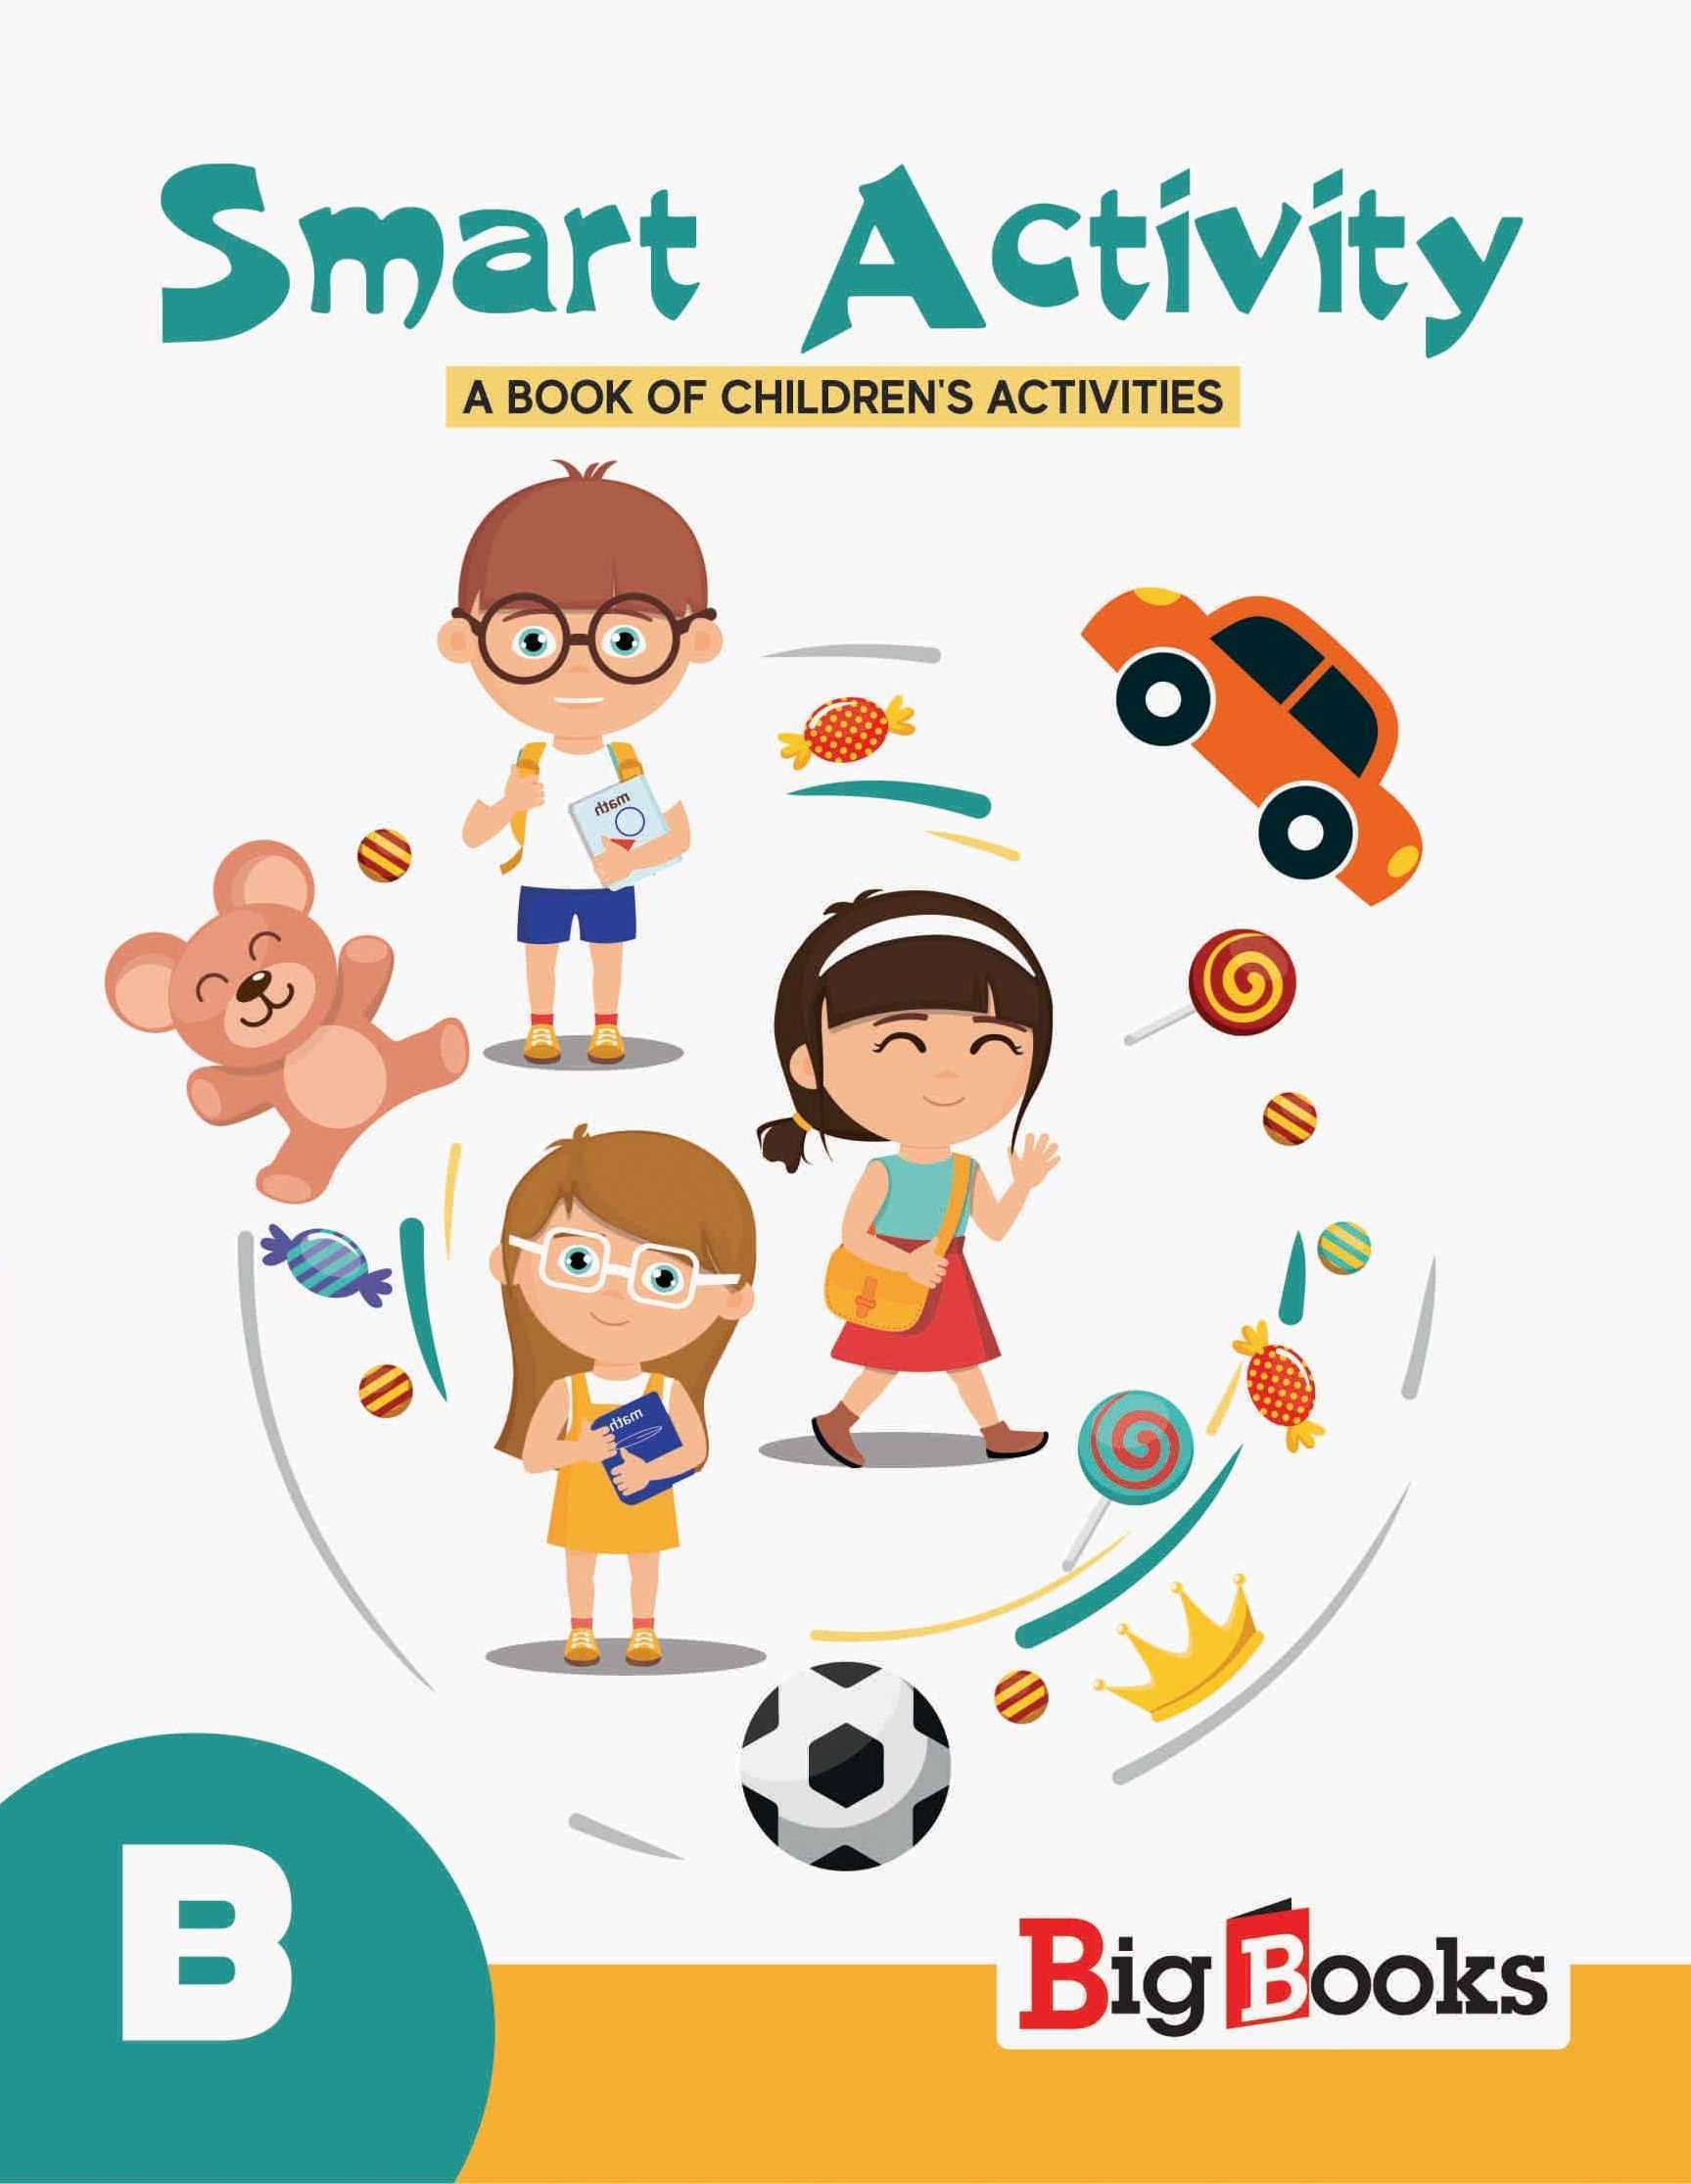 Buy smart activity book for 2